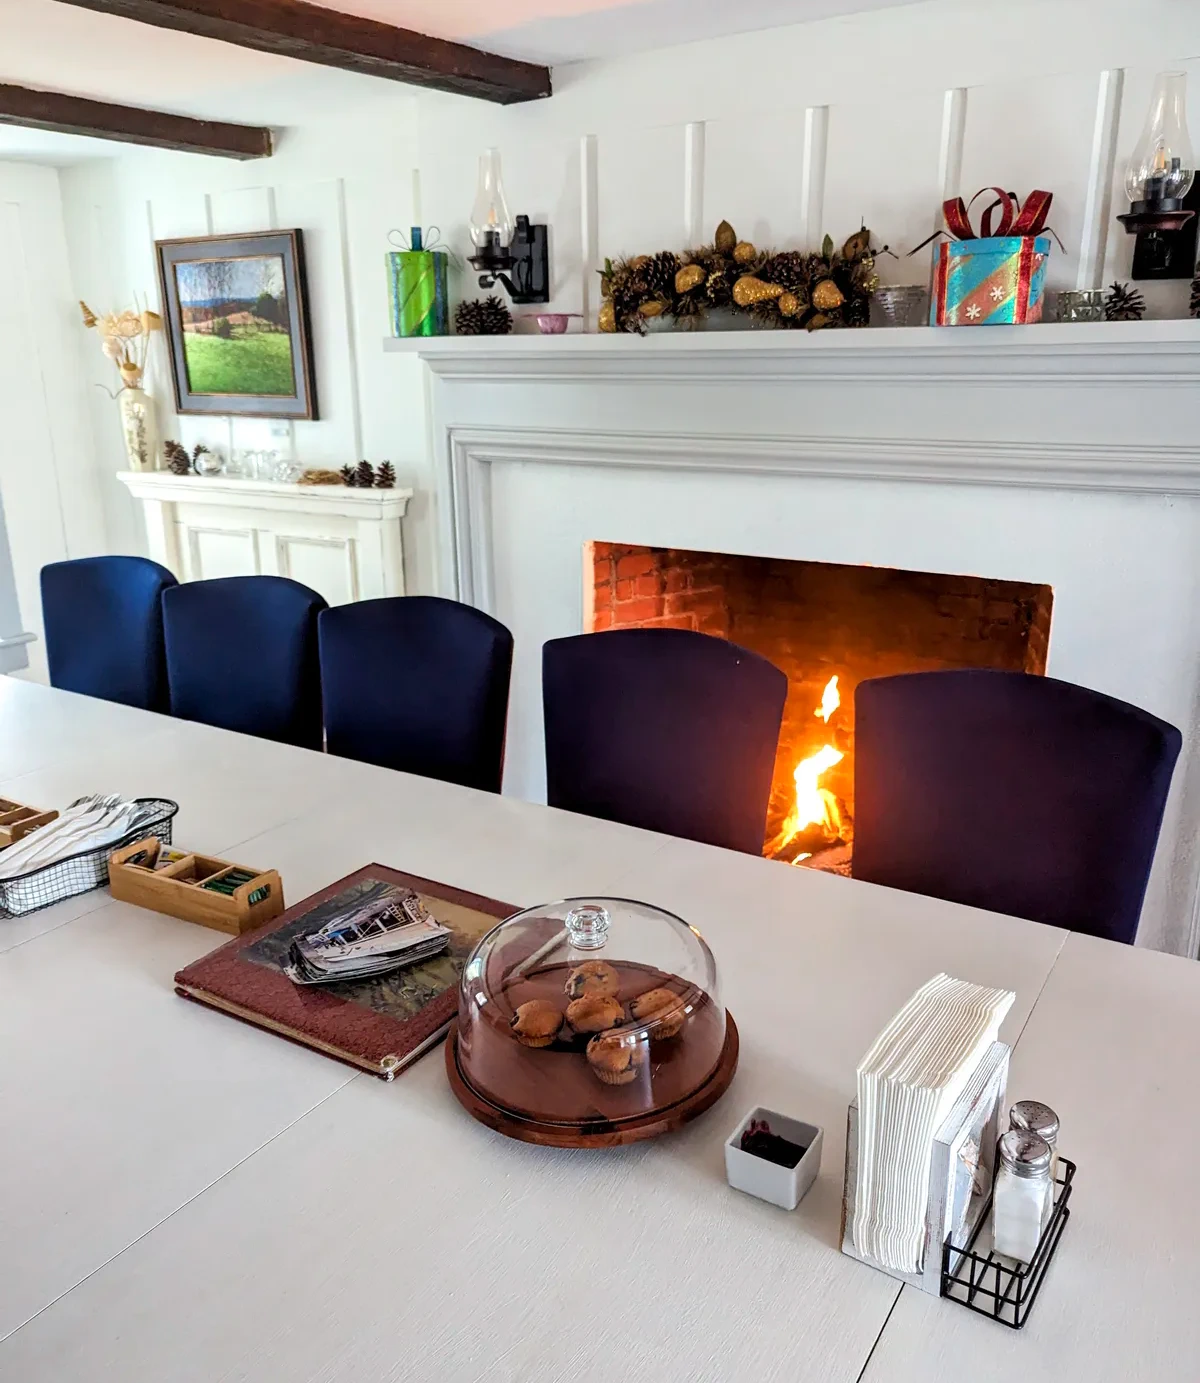 The breakfast dining area at Chimney Hill Estate Inn has a communal table and a roaring fireplace 